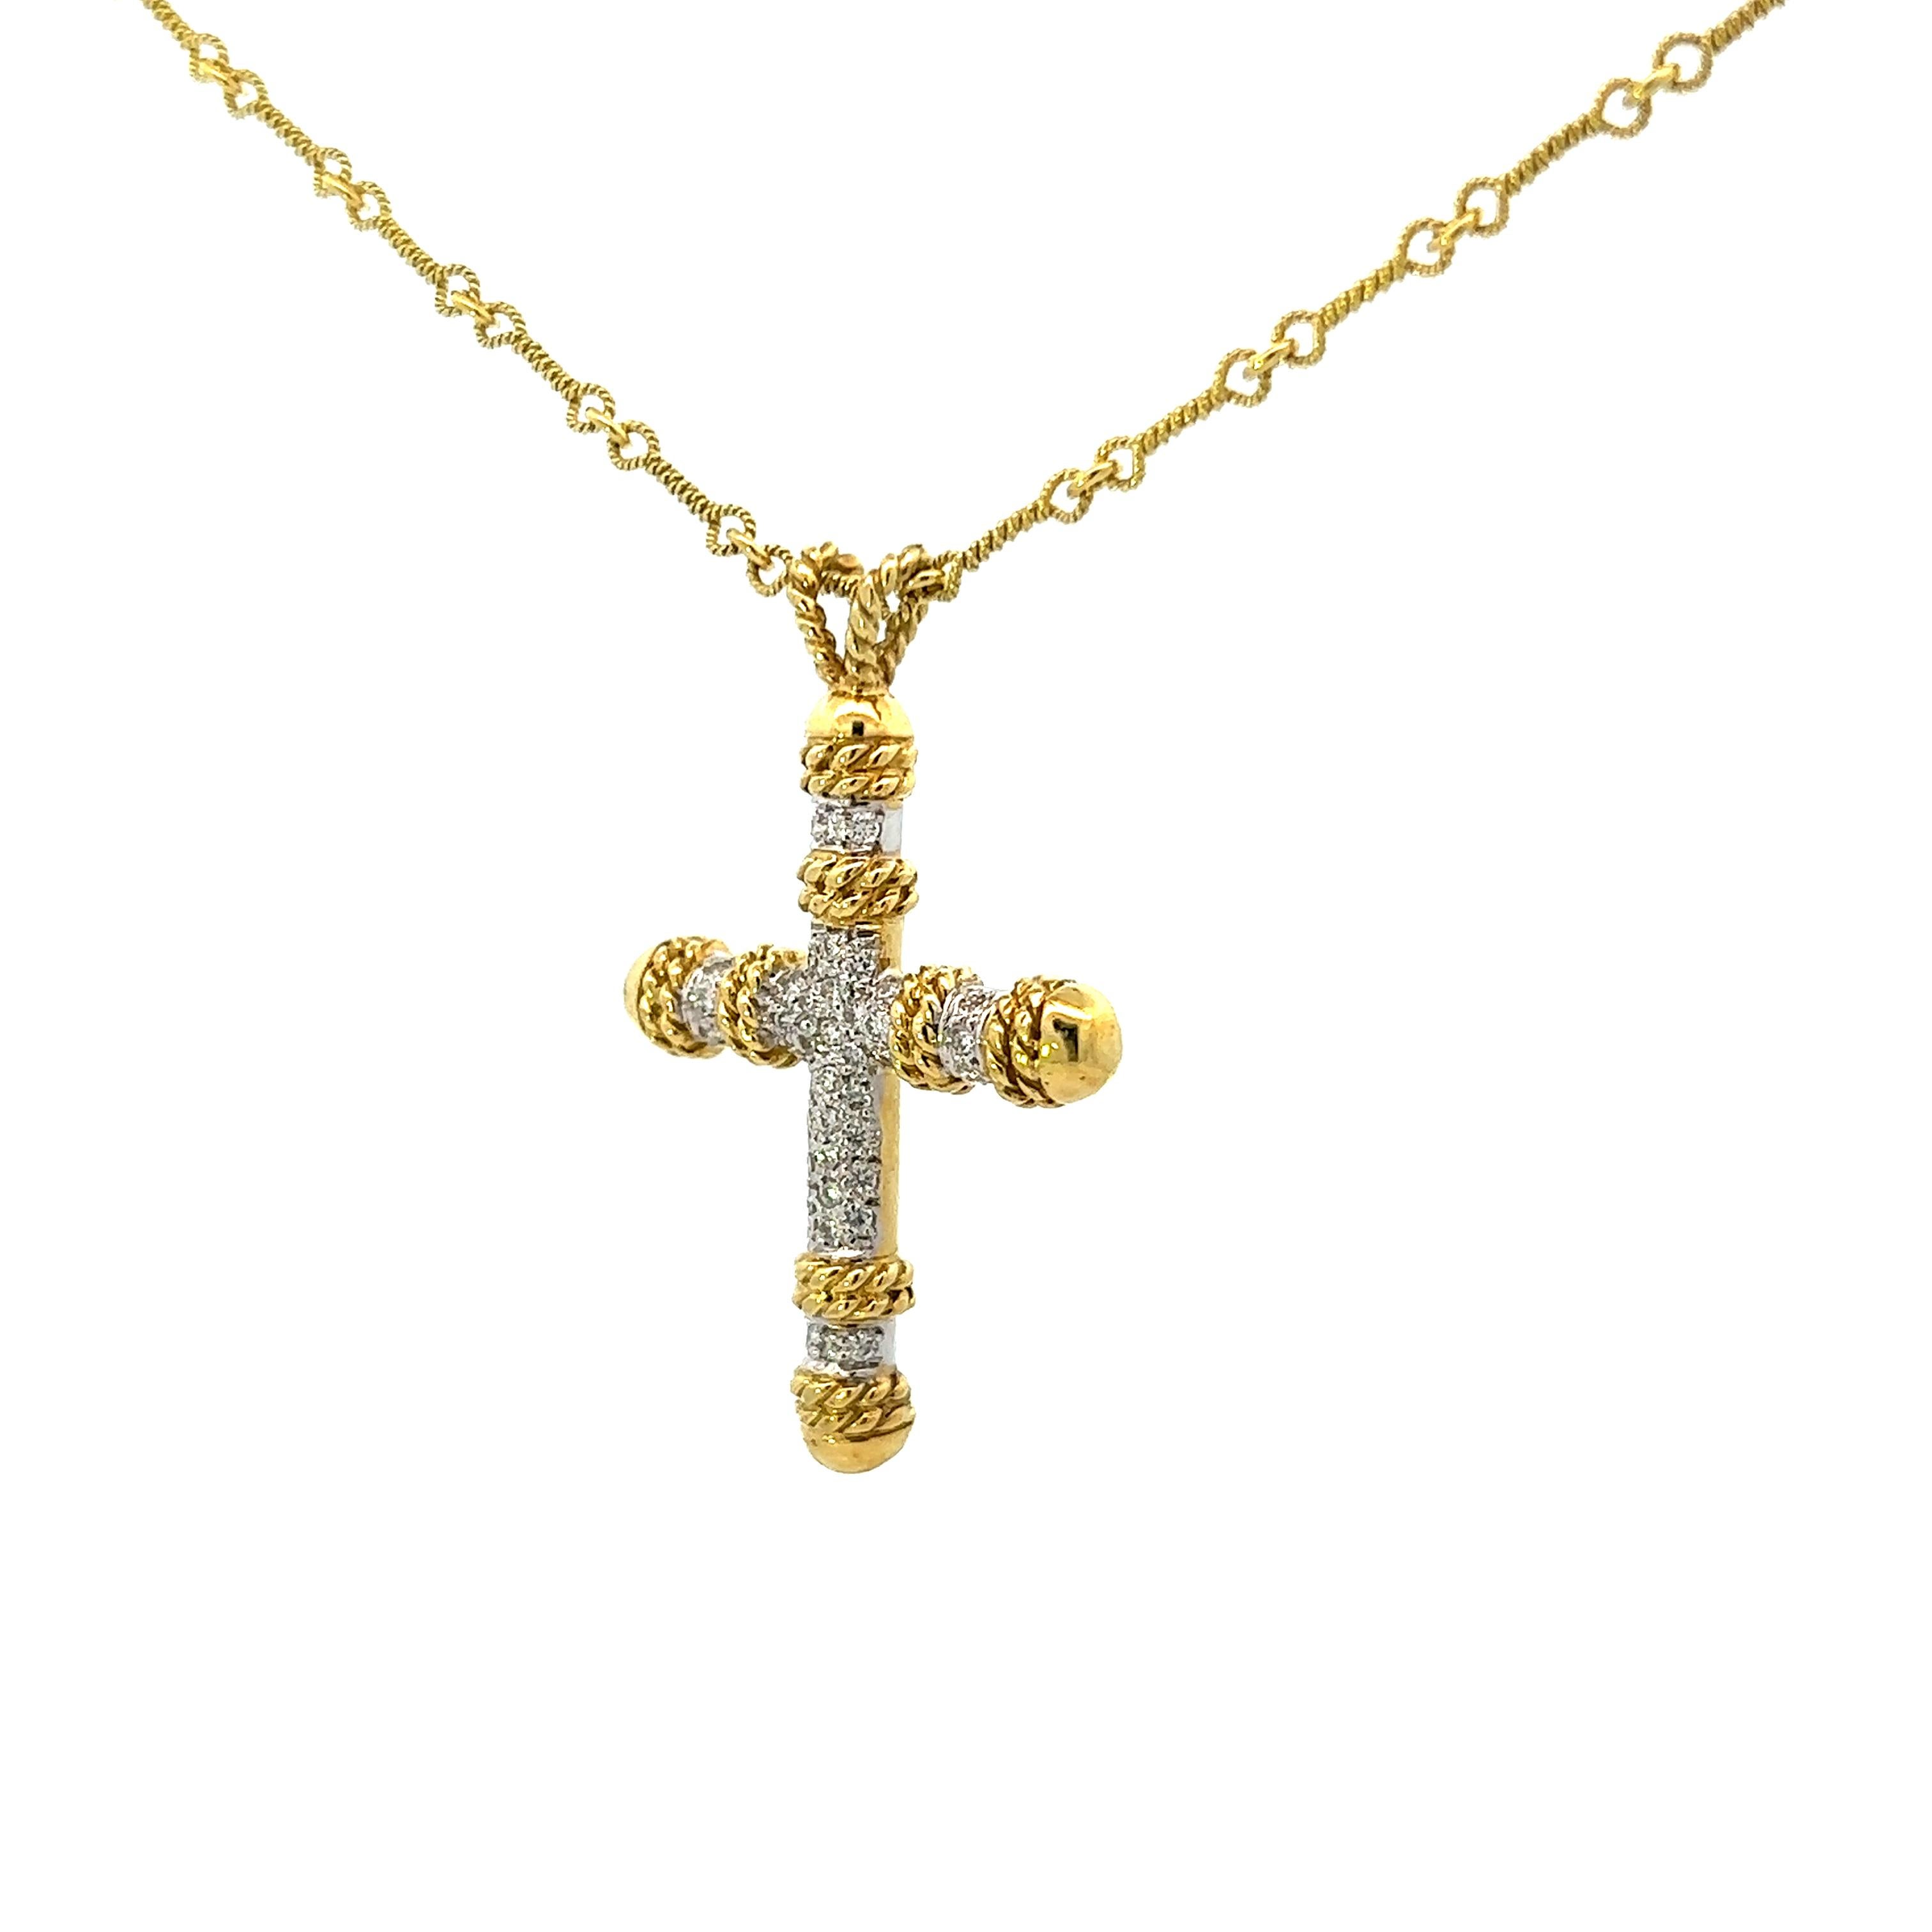 18K Yellow and White Gold Diamond Cross Pendant w/ Handmade 18k YG Chain  In Excellent Condition For Sale In Lexington, KY